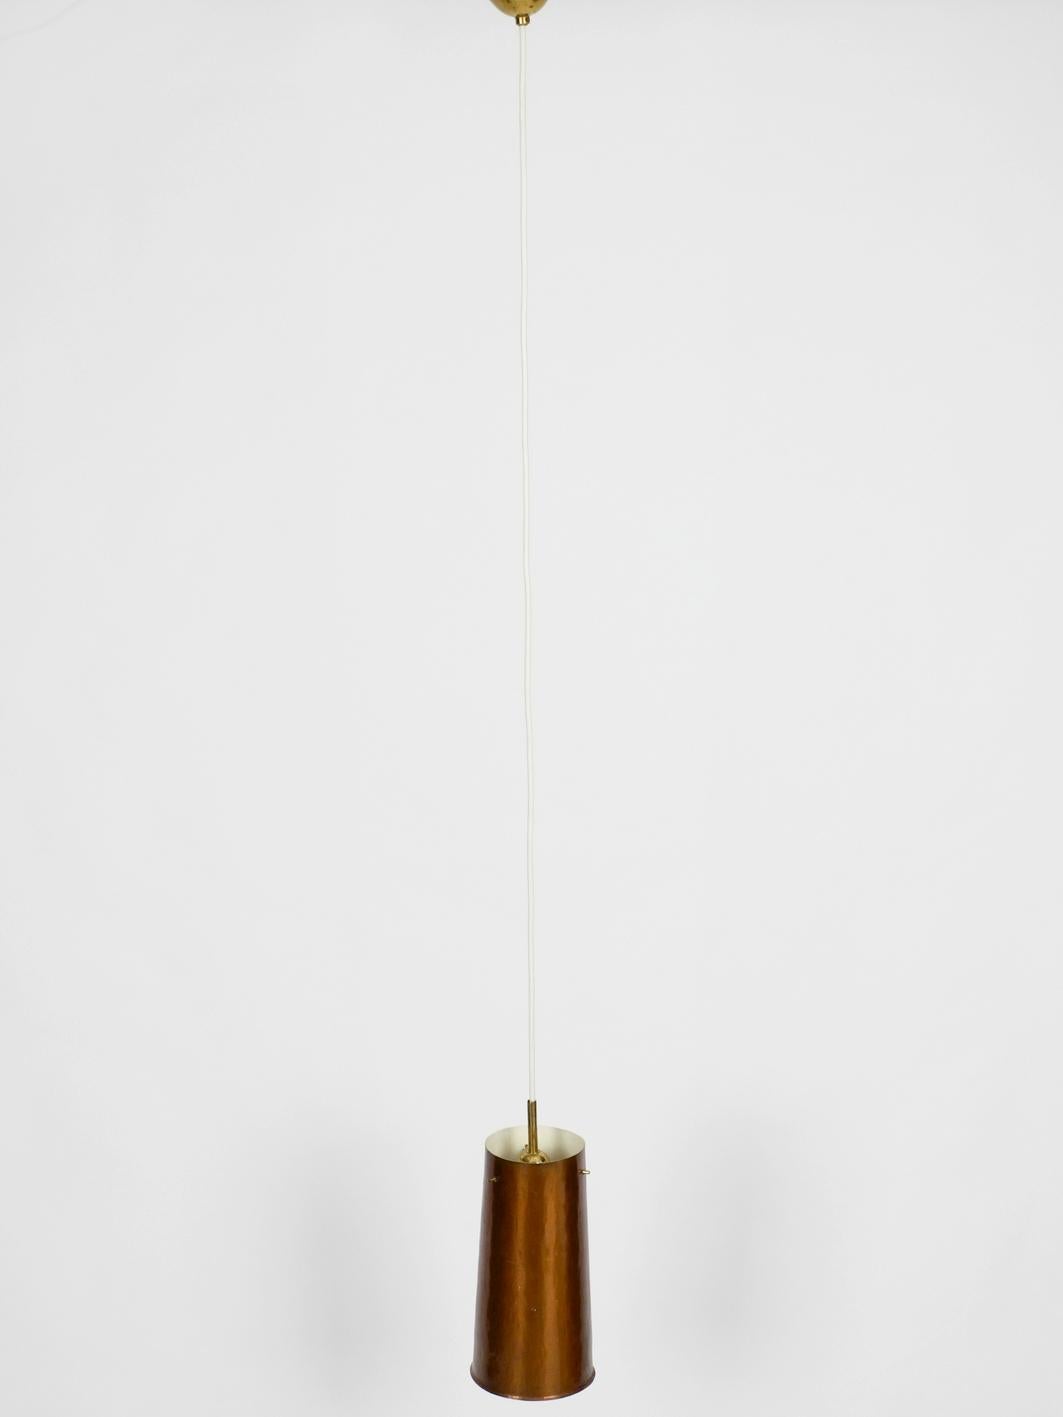 Mid-20th Century Beautiful Mid-Century Modern Pendant Lamp Made of Copper Shaped like a Cone For Sale